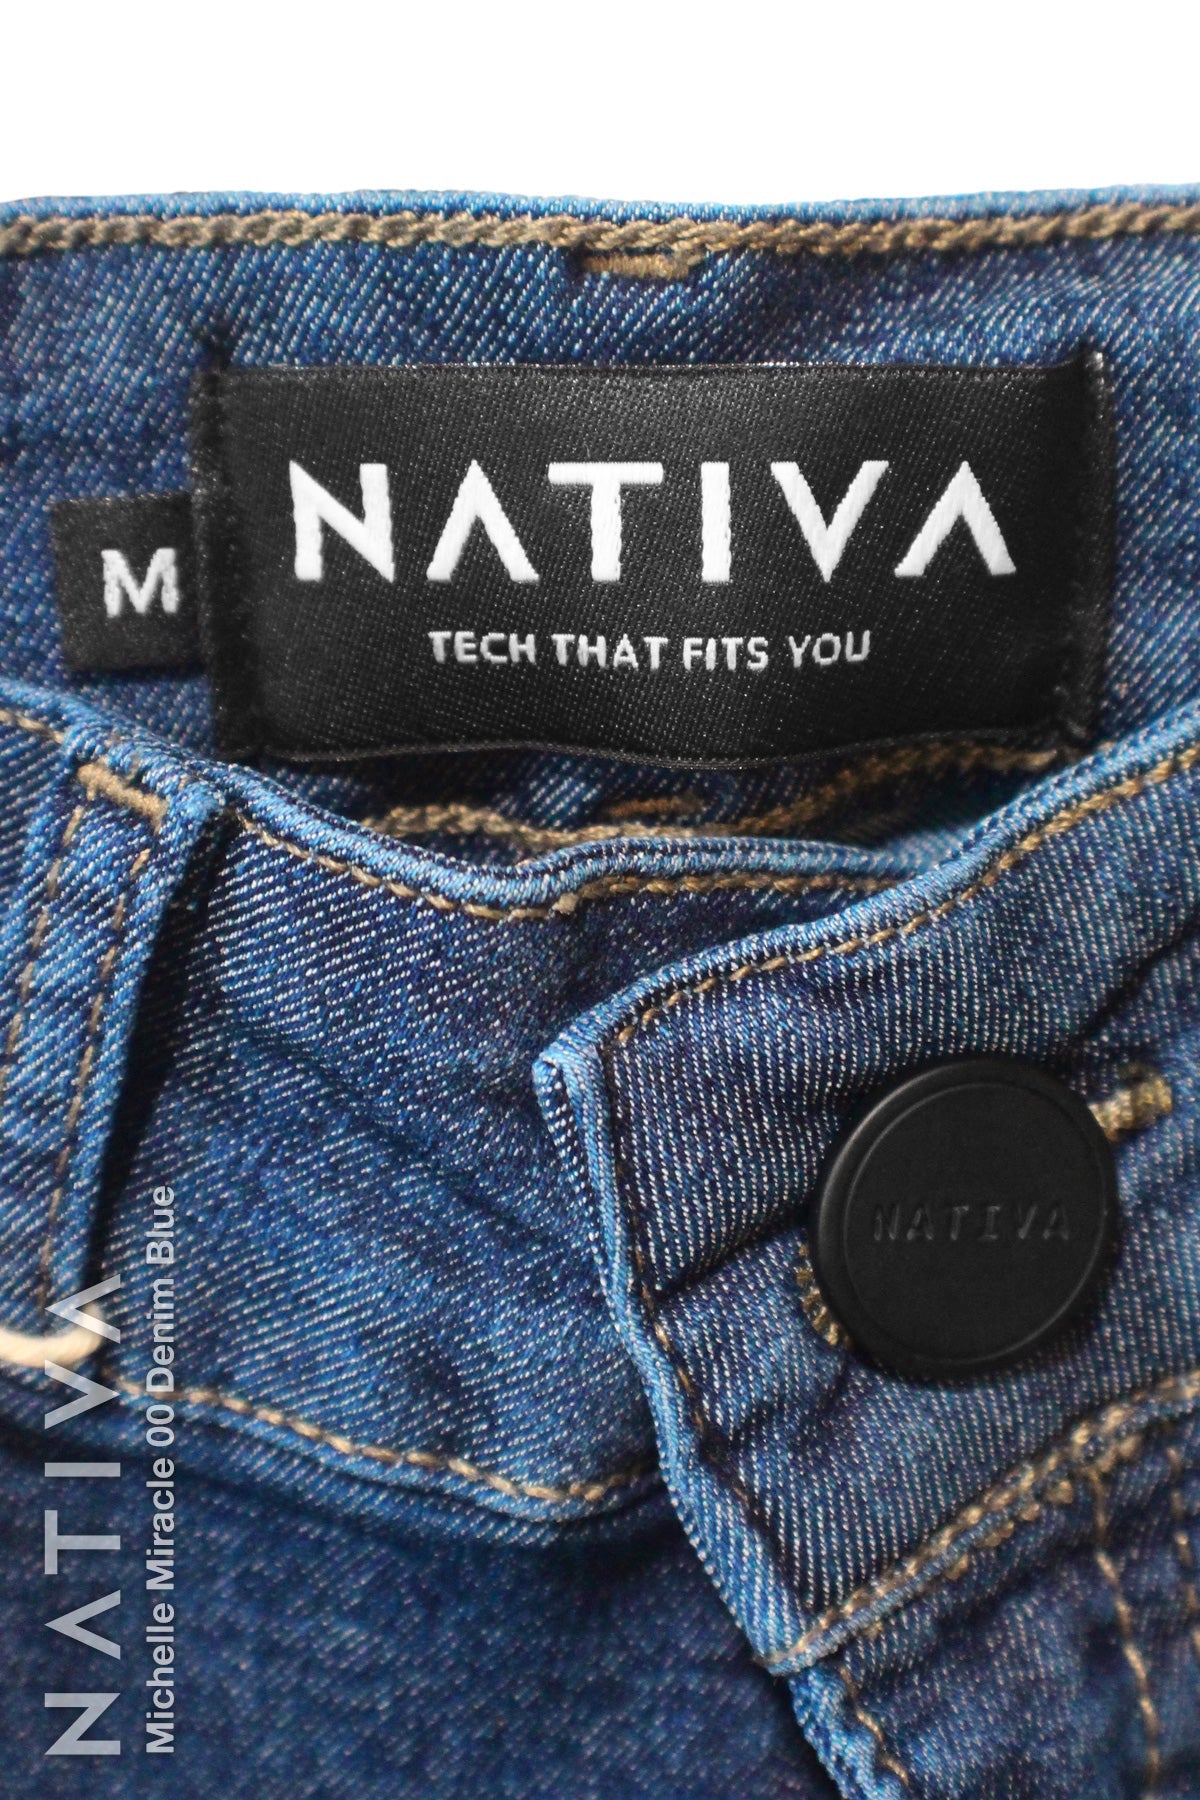 NATIVA, STRETCH JEANS. MICHELLE MIRACLE 00 DENIM BLUE, High Shaping Capacity, Extreme Motion, Hi-Rise Super Skinny Jeans